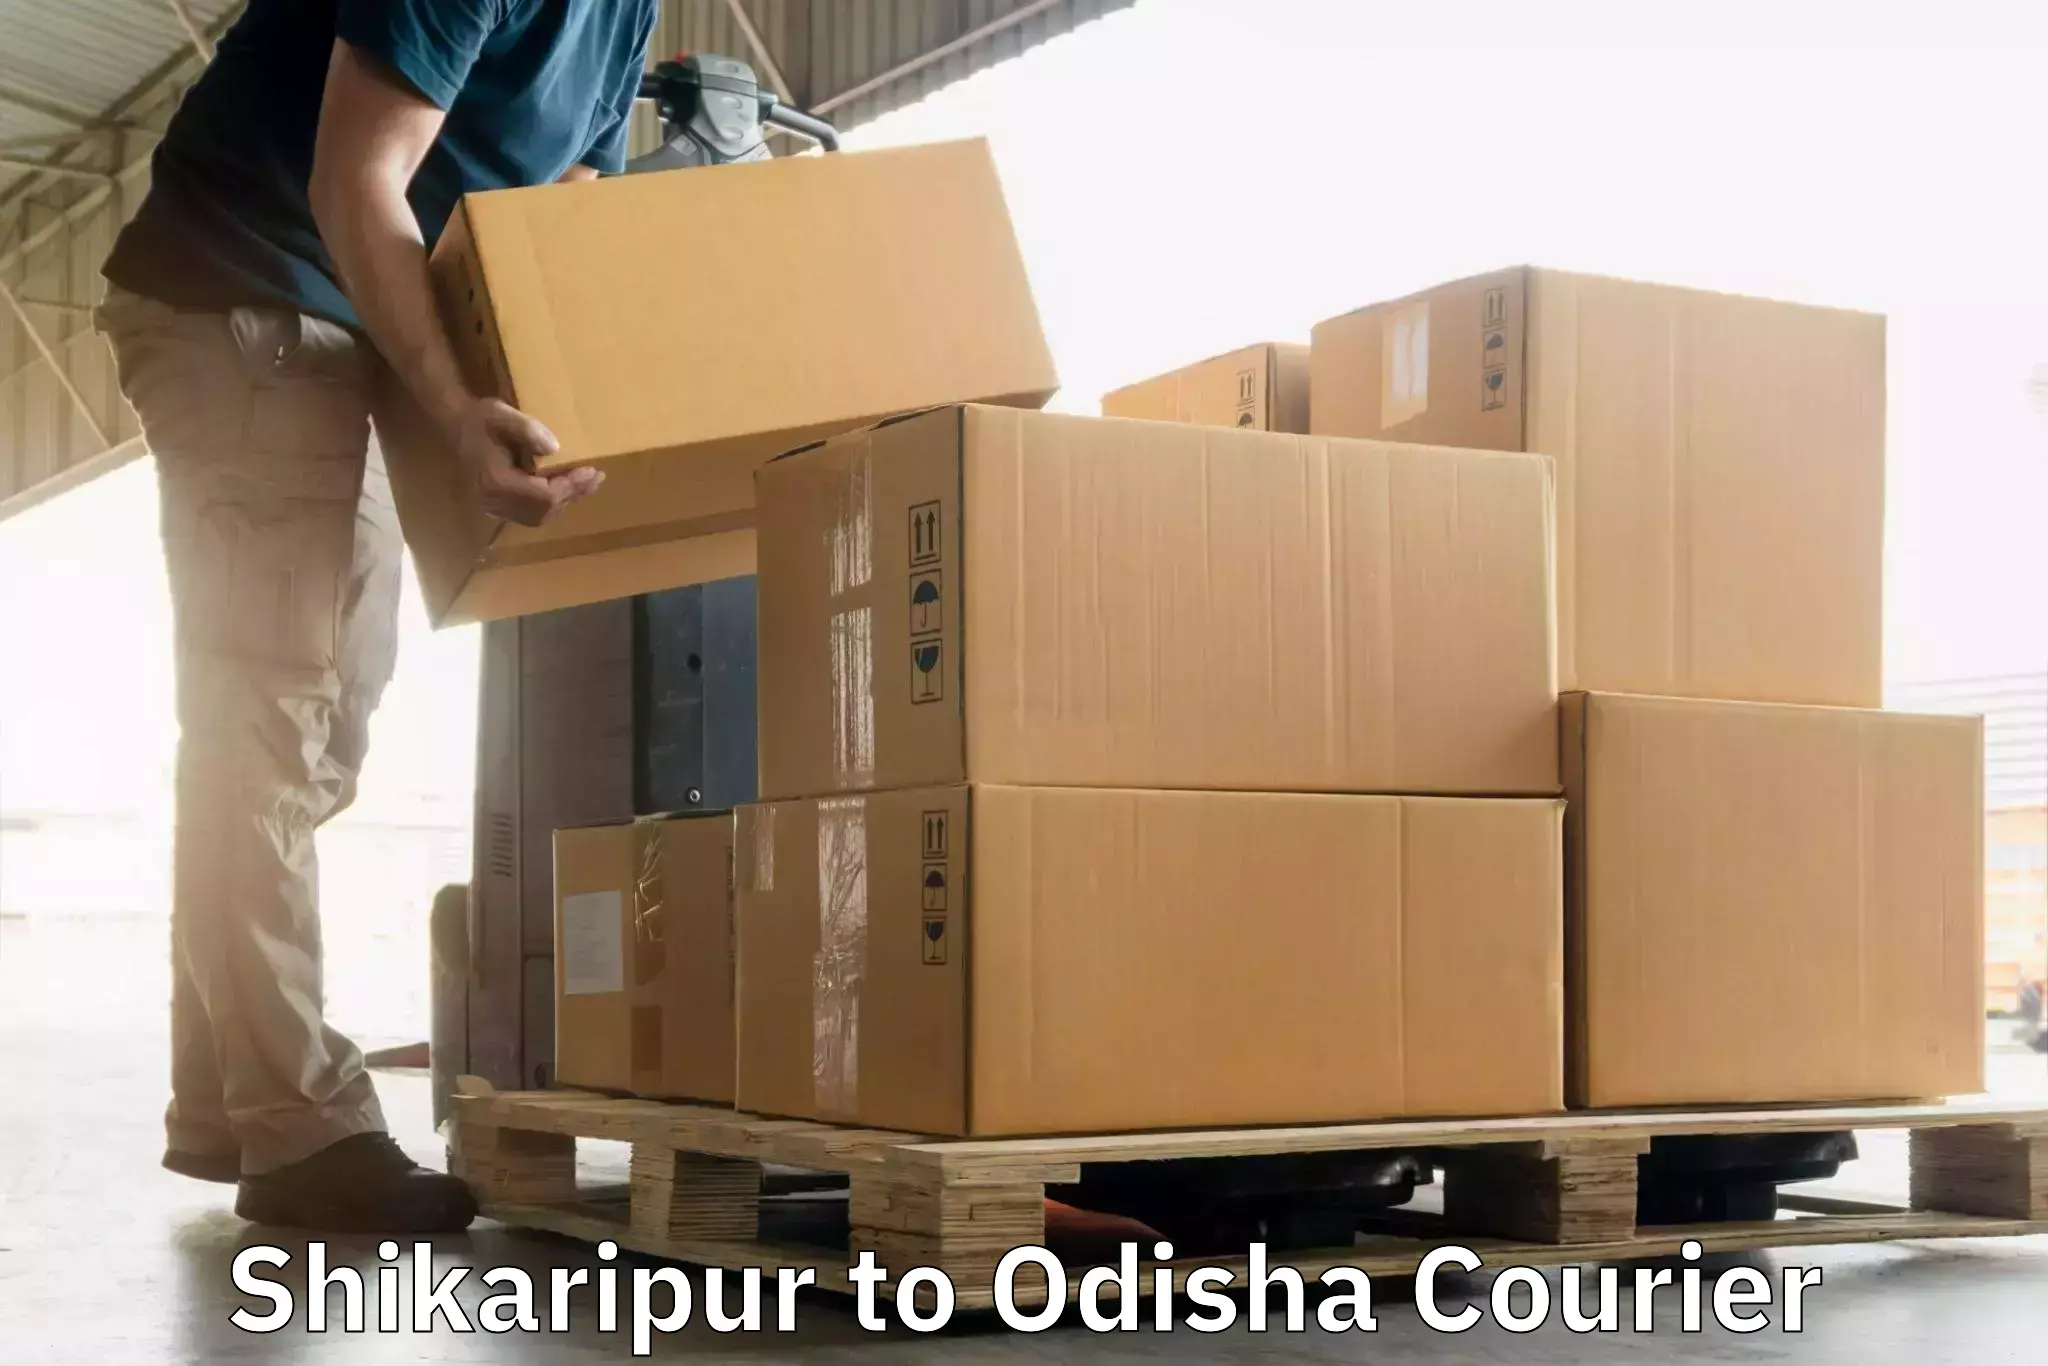 Multi-national courier services Shikaripur to Kadobahal